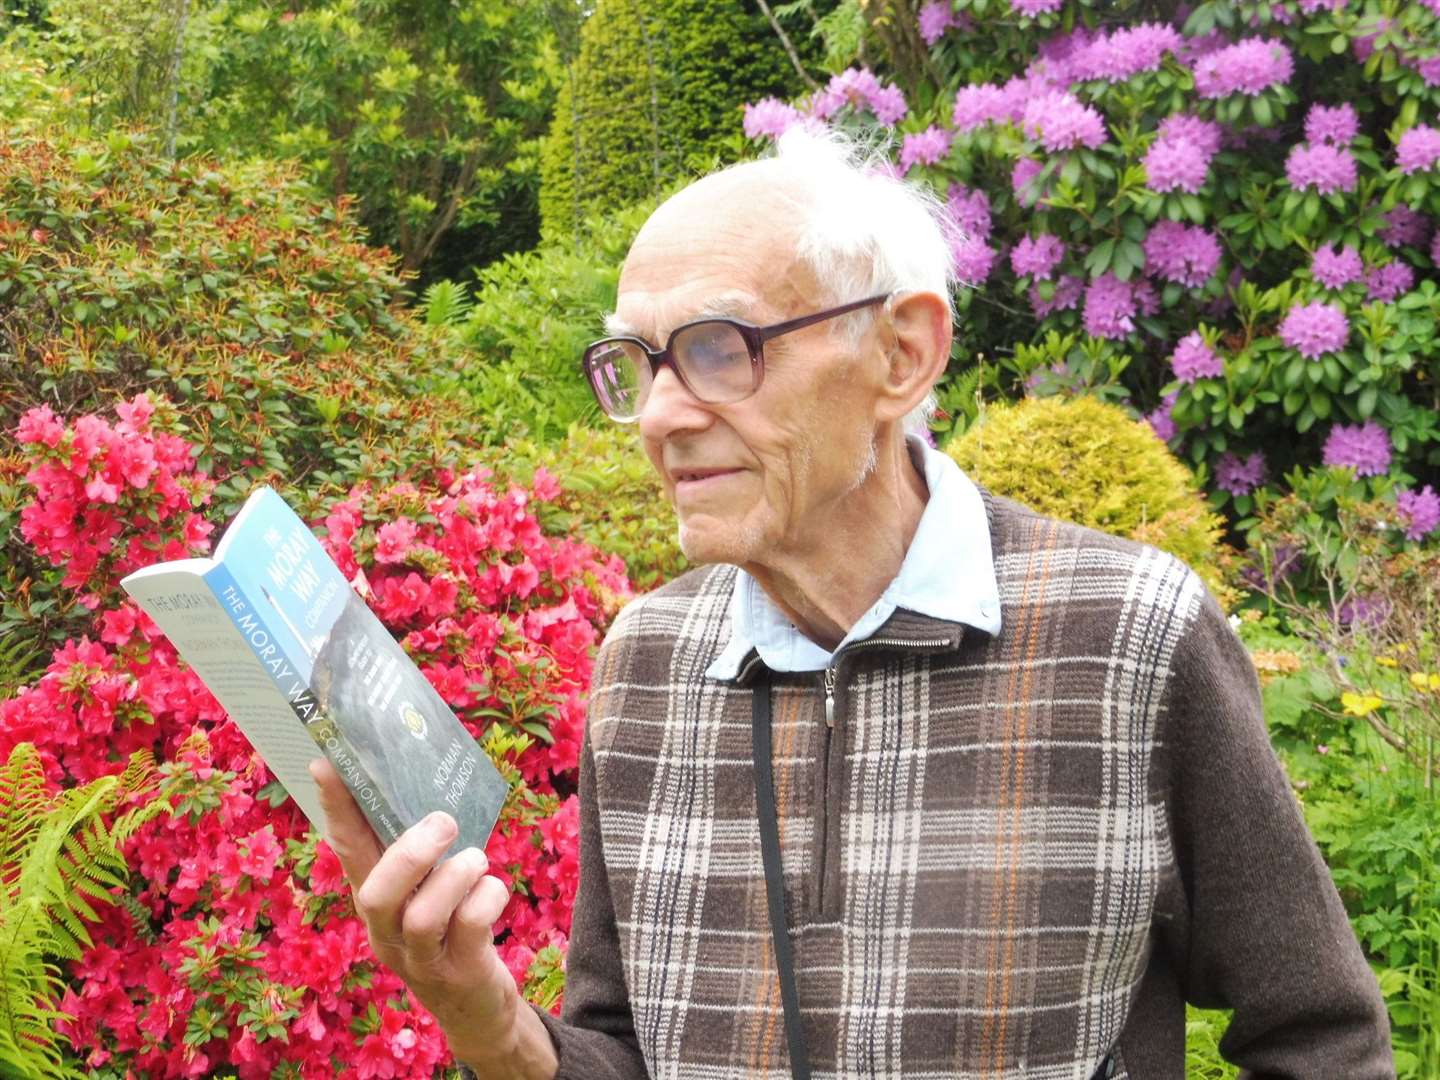 Author Norman Thomson with a copy of his new guide book, available at local bookshops.